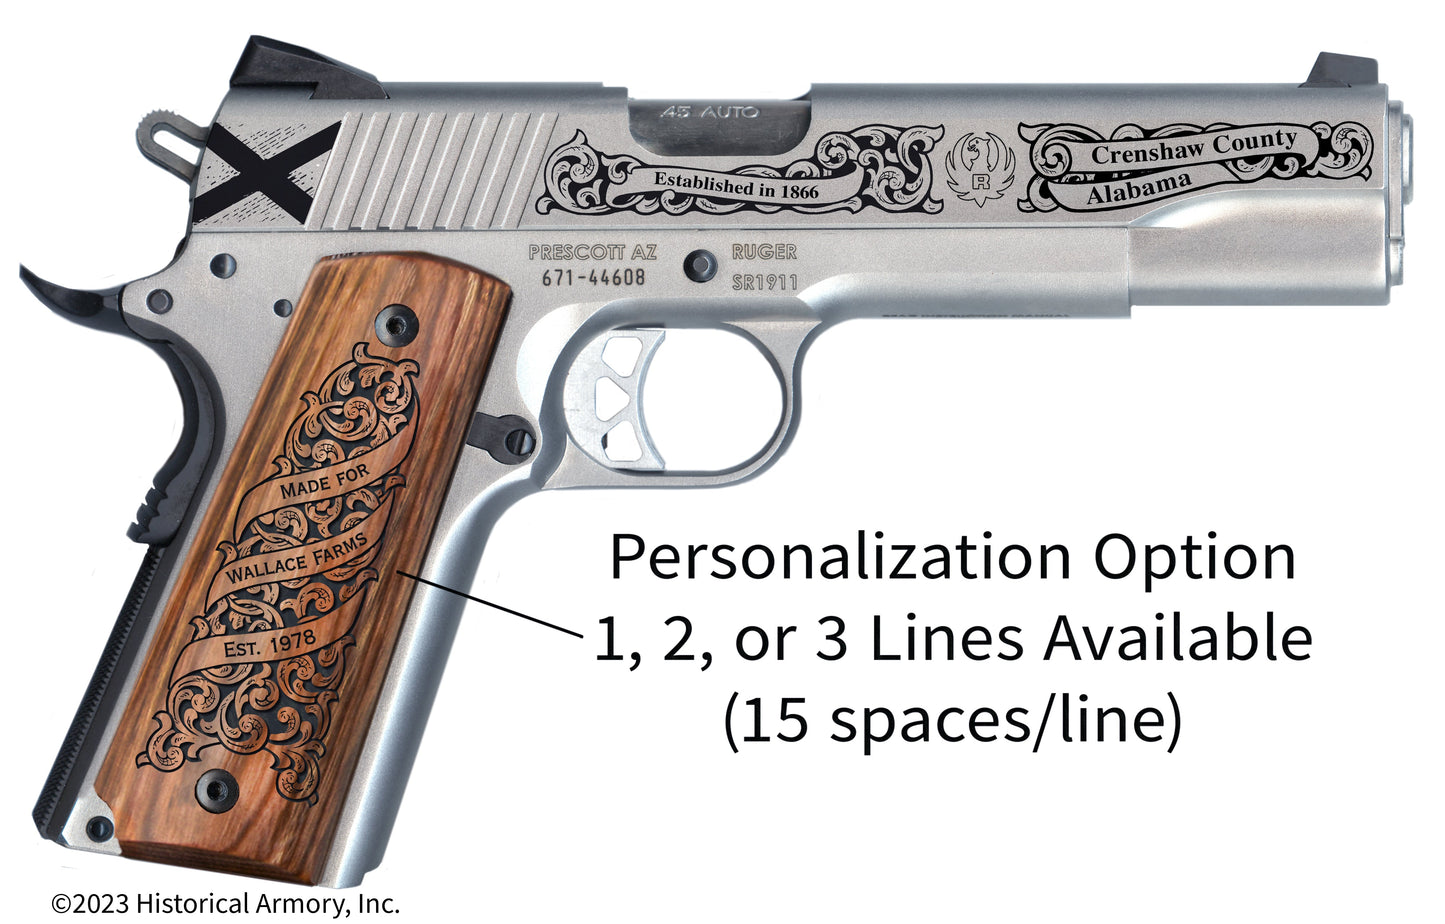 Crenshaw  County Alabama Personalized Engraved .45 Auto Ruger 1911